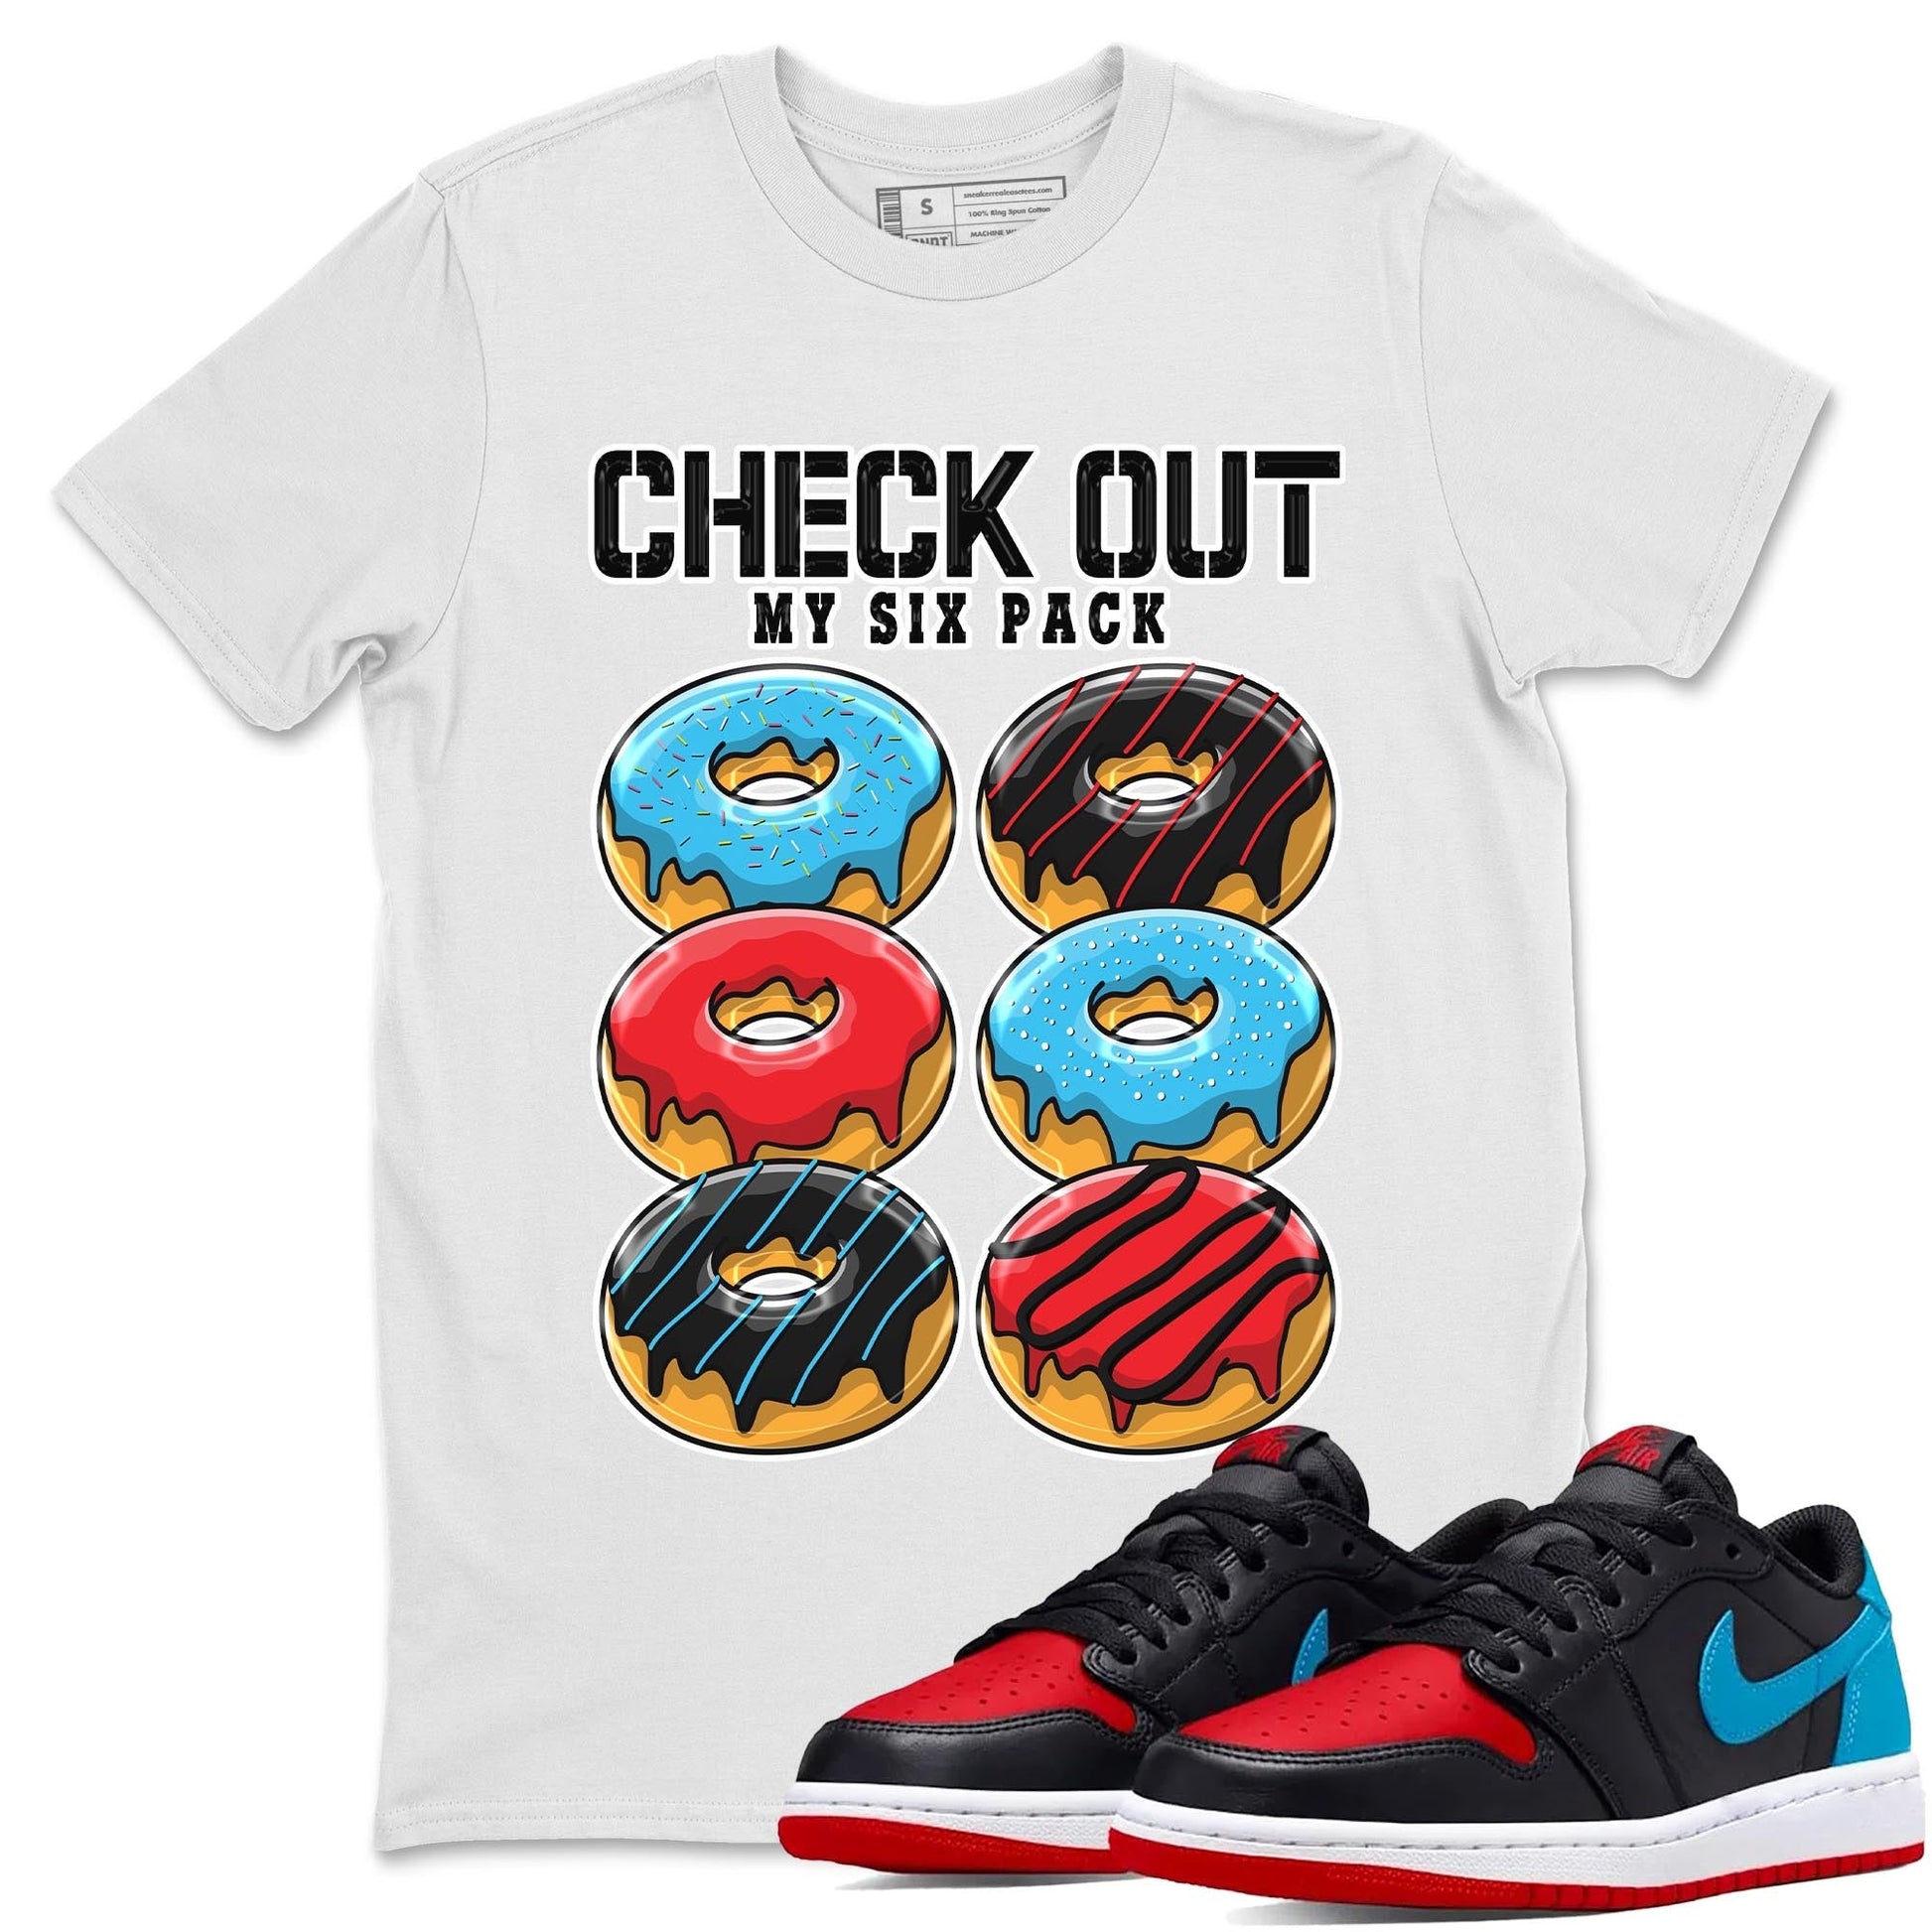 Air Jordan 1 Low UNC to Chicago shirt to match jordans Check Out My Six Pack Streetwear Sneaker Shirt Air Jordan 1 UNC to Chicago Drip Gear Zone Sneaker Matching Clothing Unisex White 1 T-Shirt